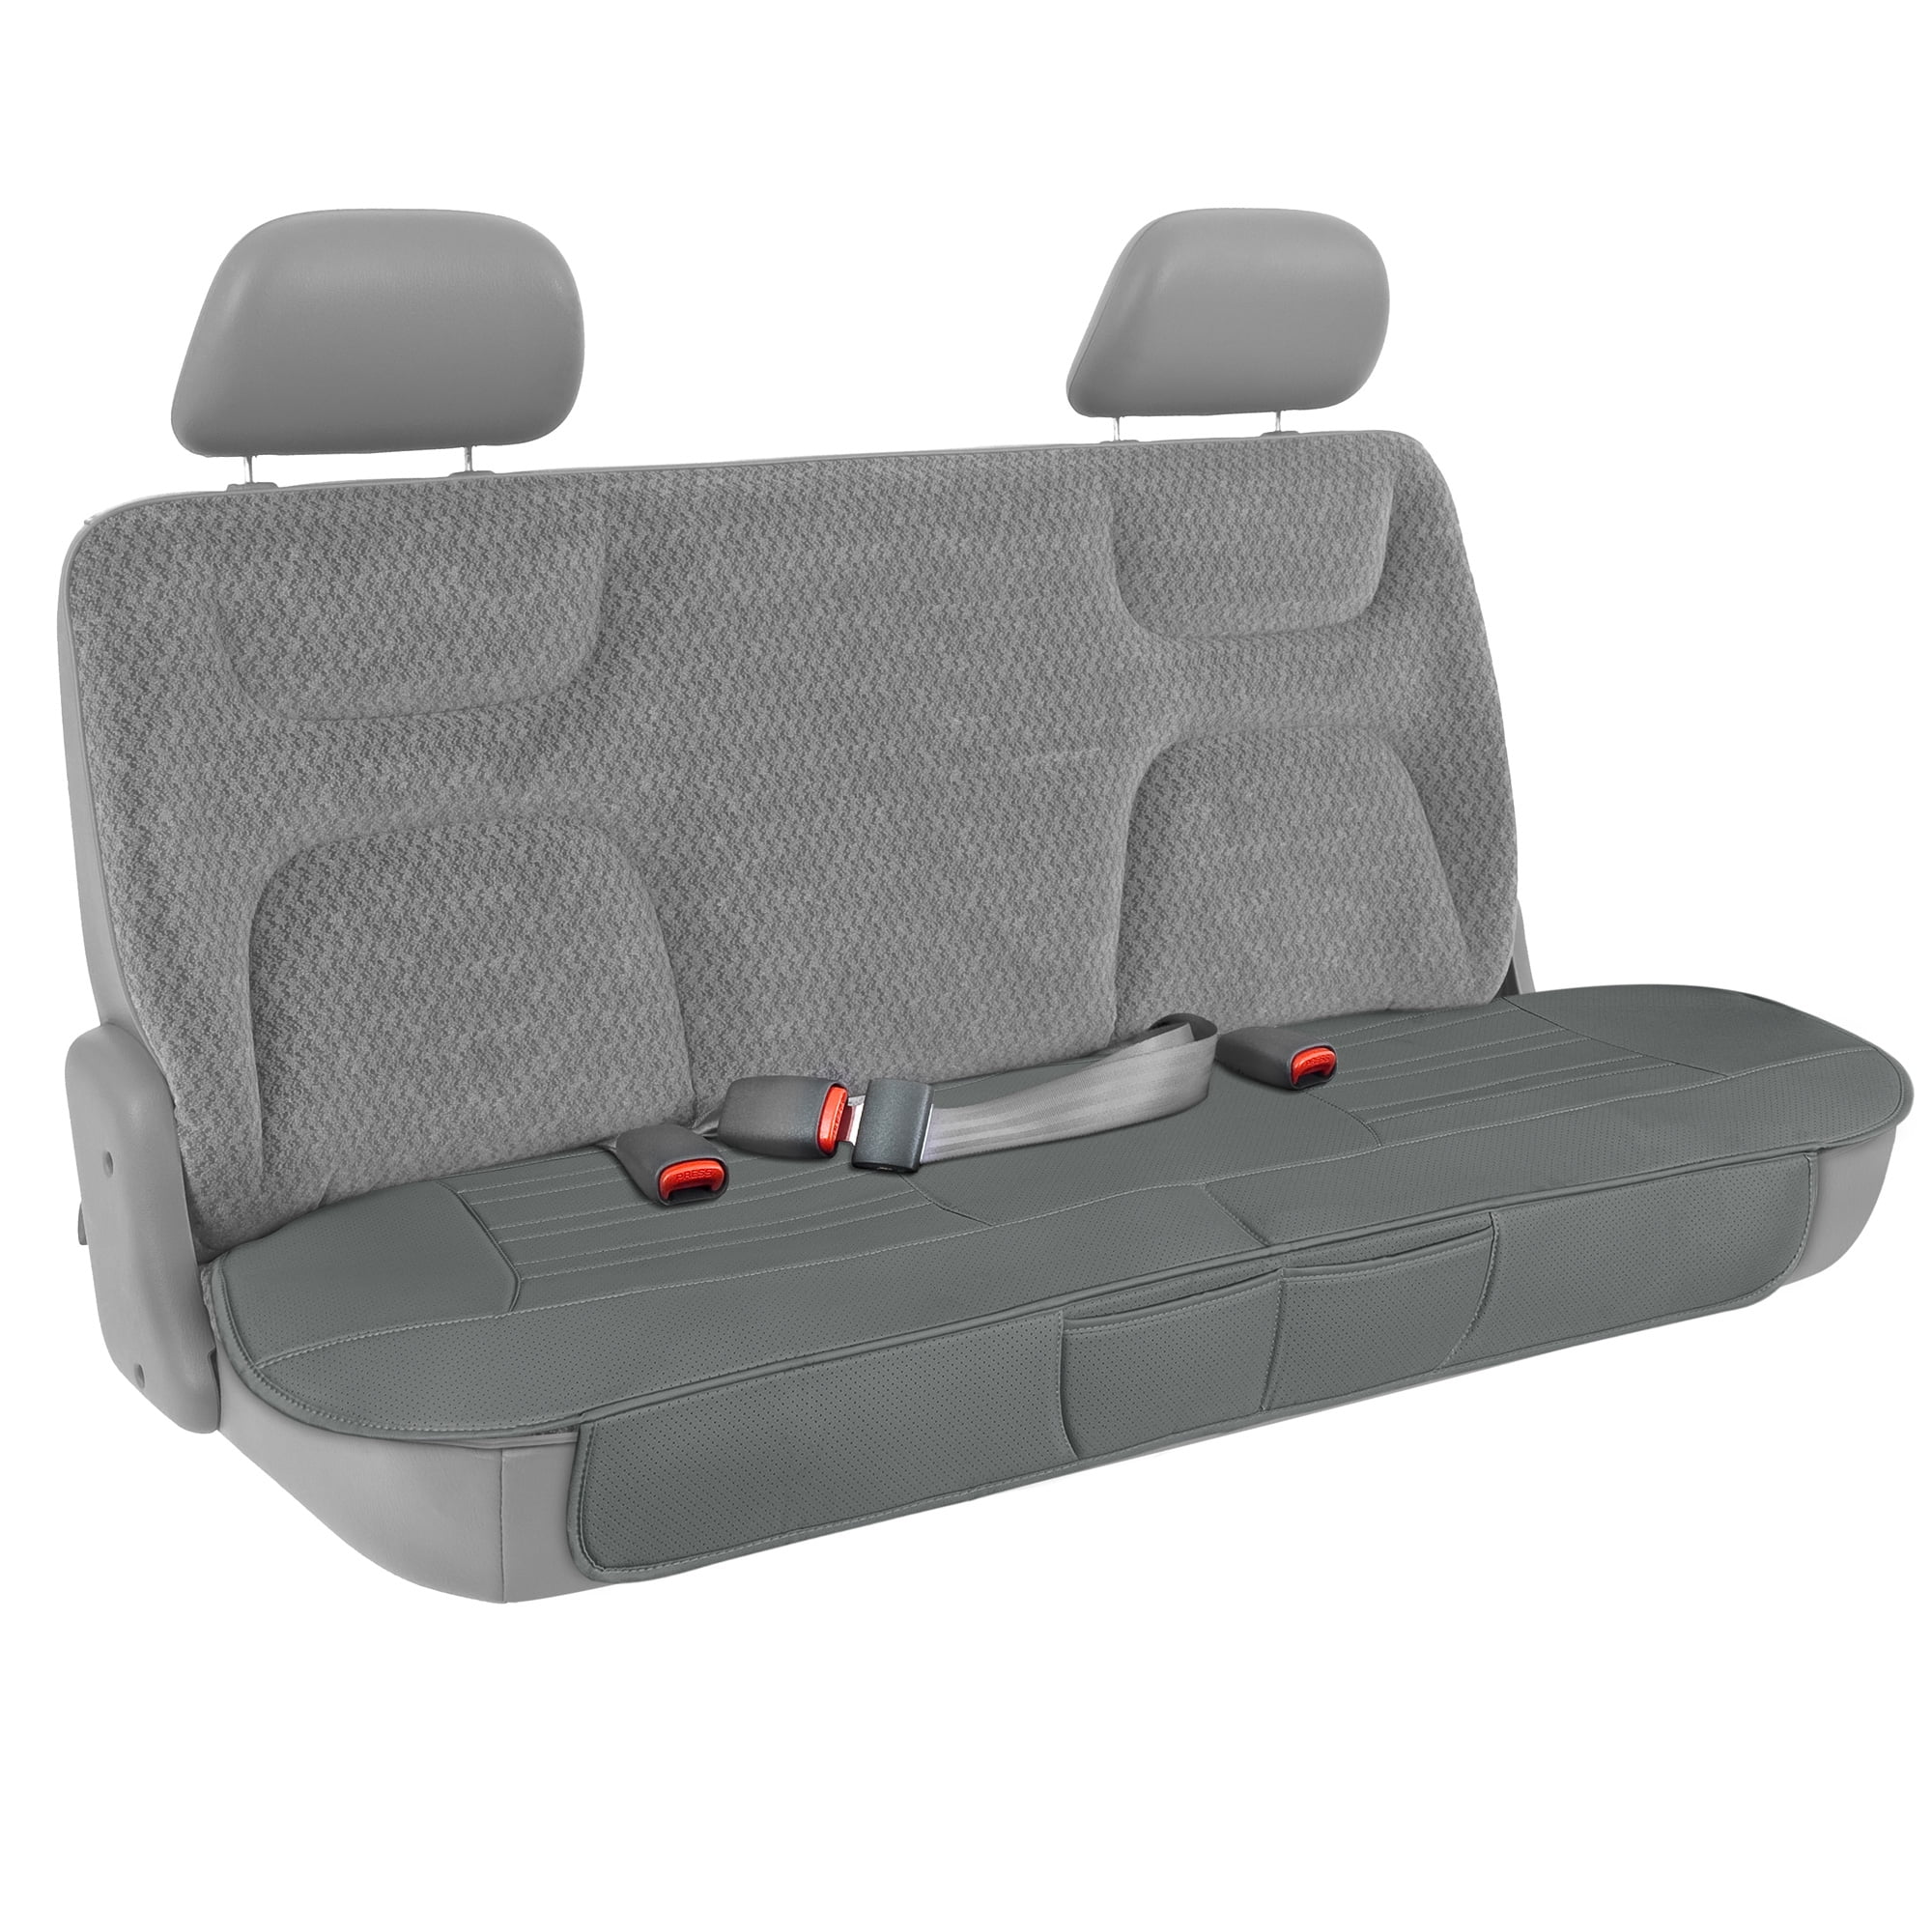 Truck and SUV Universal Fit Neoprene Foam Bench Cover with Extended Side Coverage for Car Van Motor Trend M268 Gray SpillGuard Waterproof Rear Seat Protector 